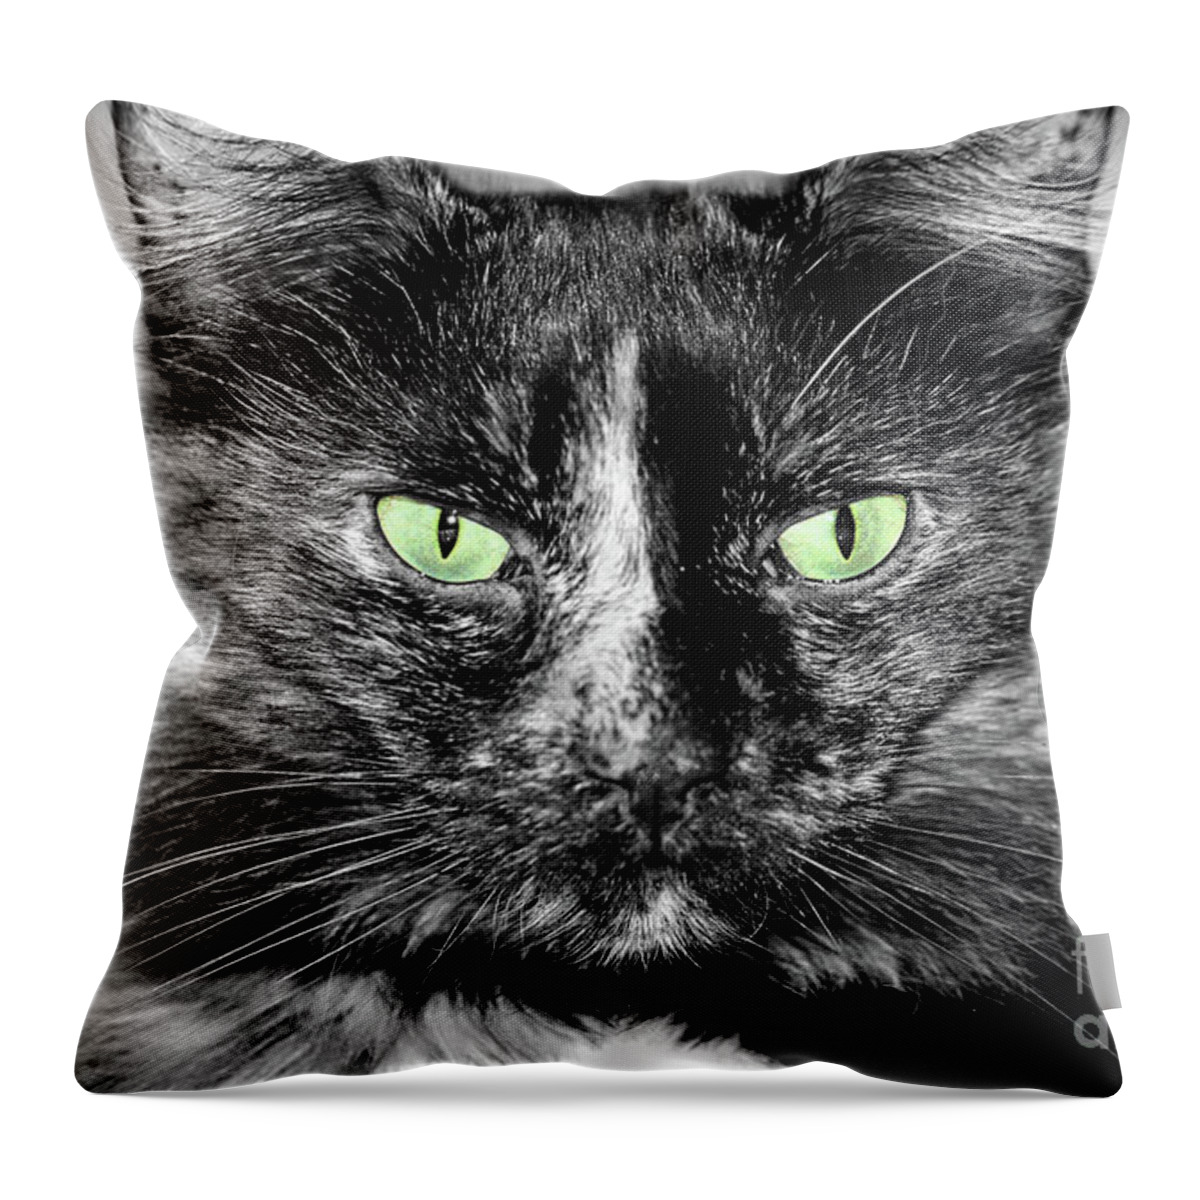 Cat; Torti; Tortoiseshell; Torti Cat; Tortoiseshell Cat; Stare; Eyes; Attitude; Catitude; Tortitude; Black And White; Green; Selective Color; Photography; Macro; Close-up; Portrait; Horizontal Throw Pillow featuring the digital art Tortitude with Green Eyes by Tina Uihlein